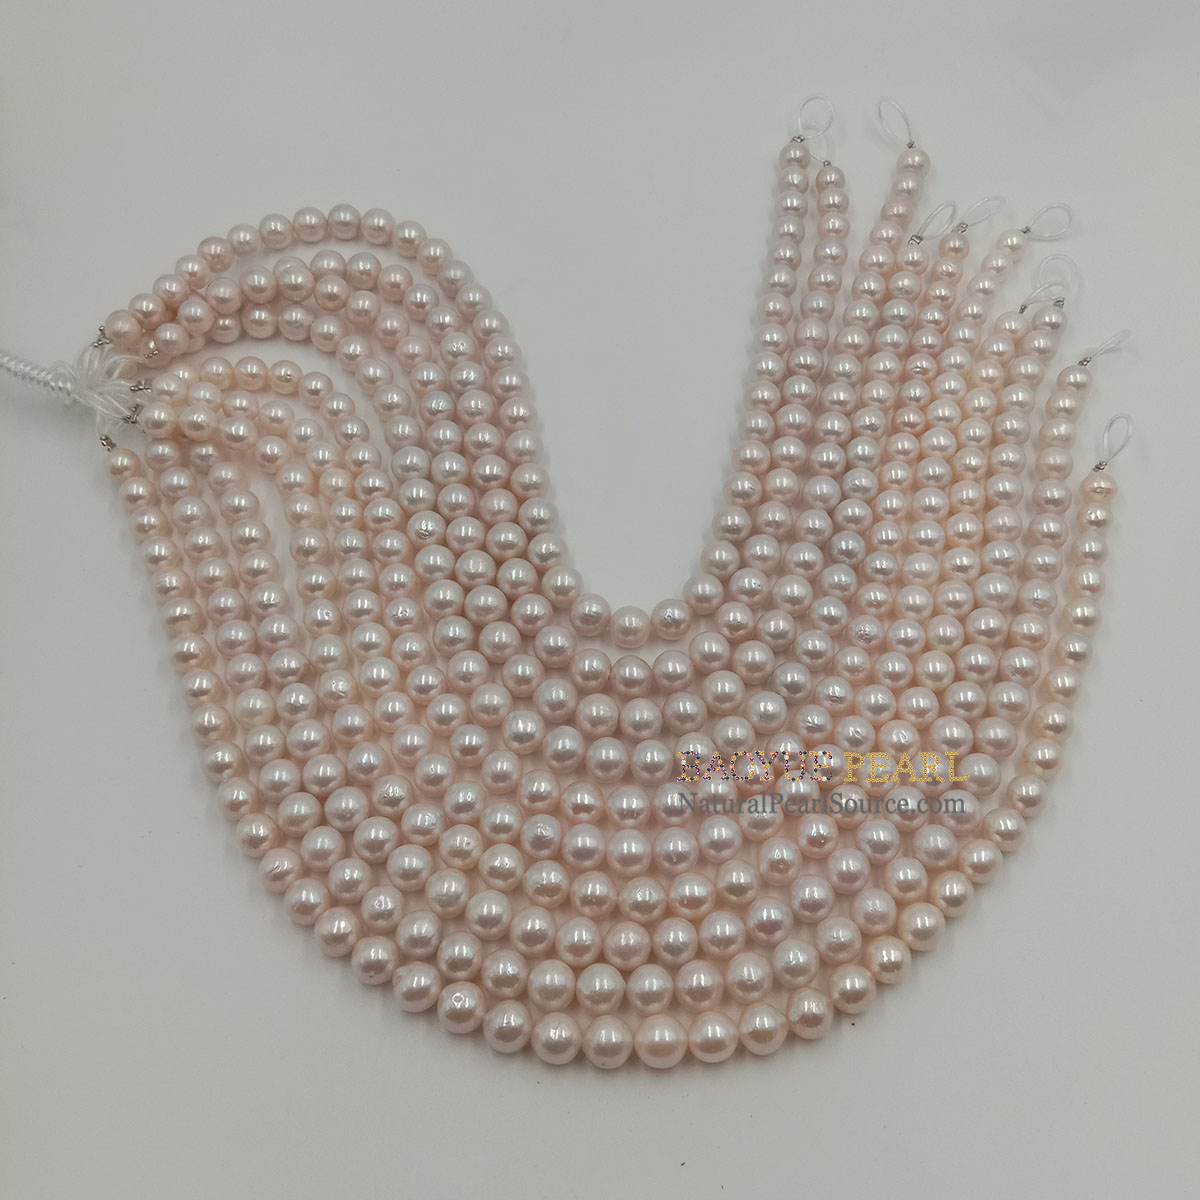 9-11 mm freshwater pearl wholesale 16 inch white round loose freshwater pearls in strand